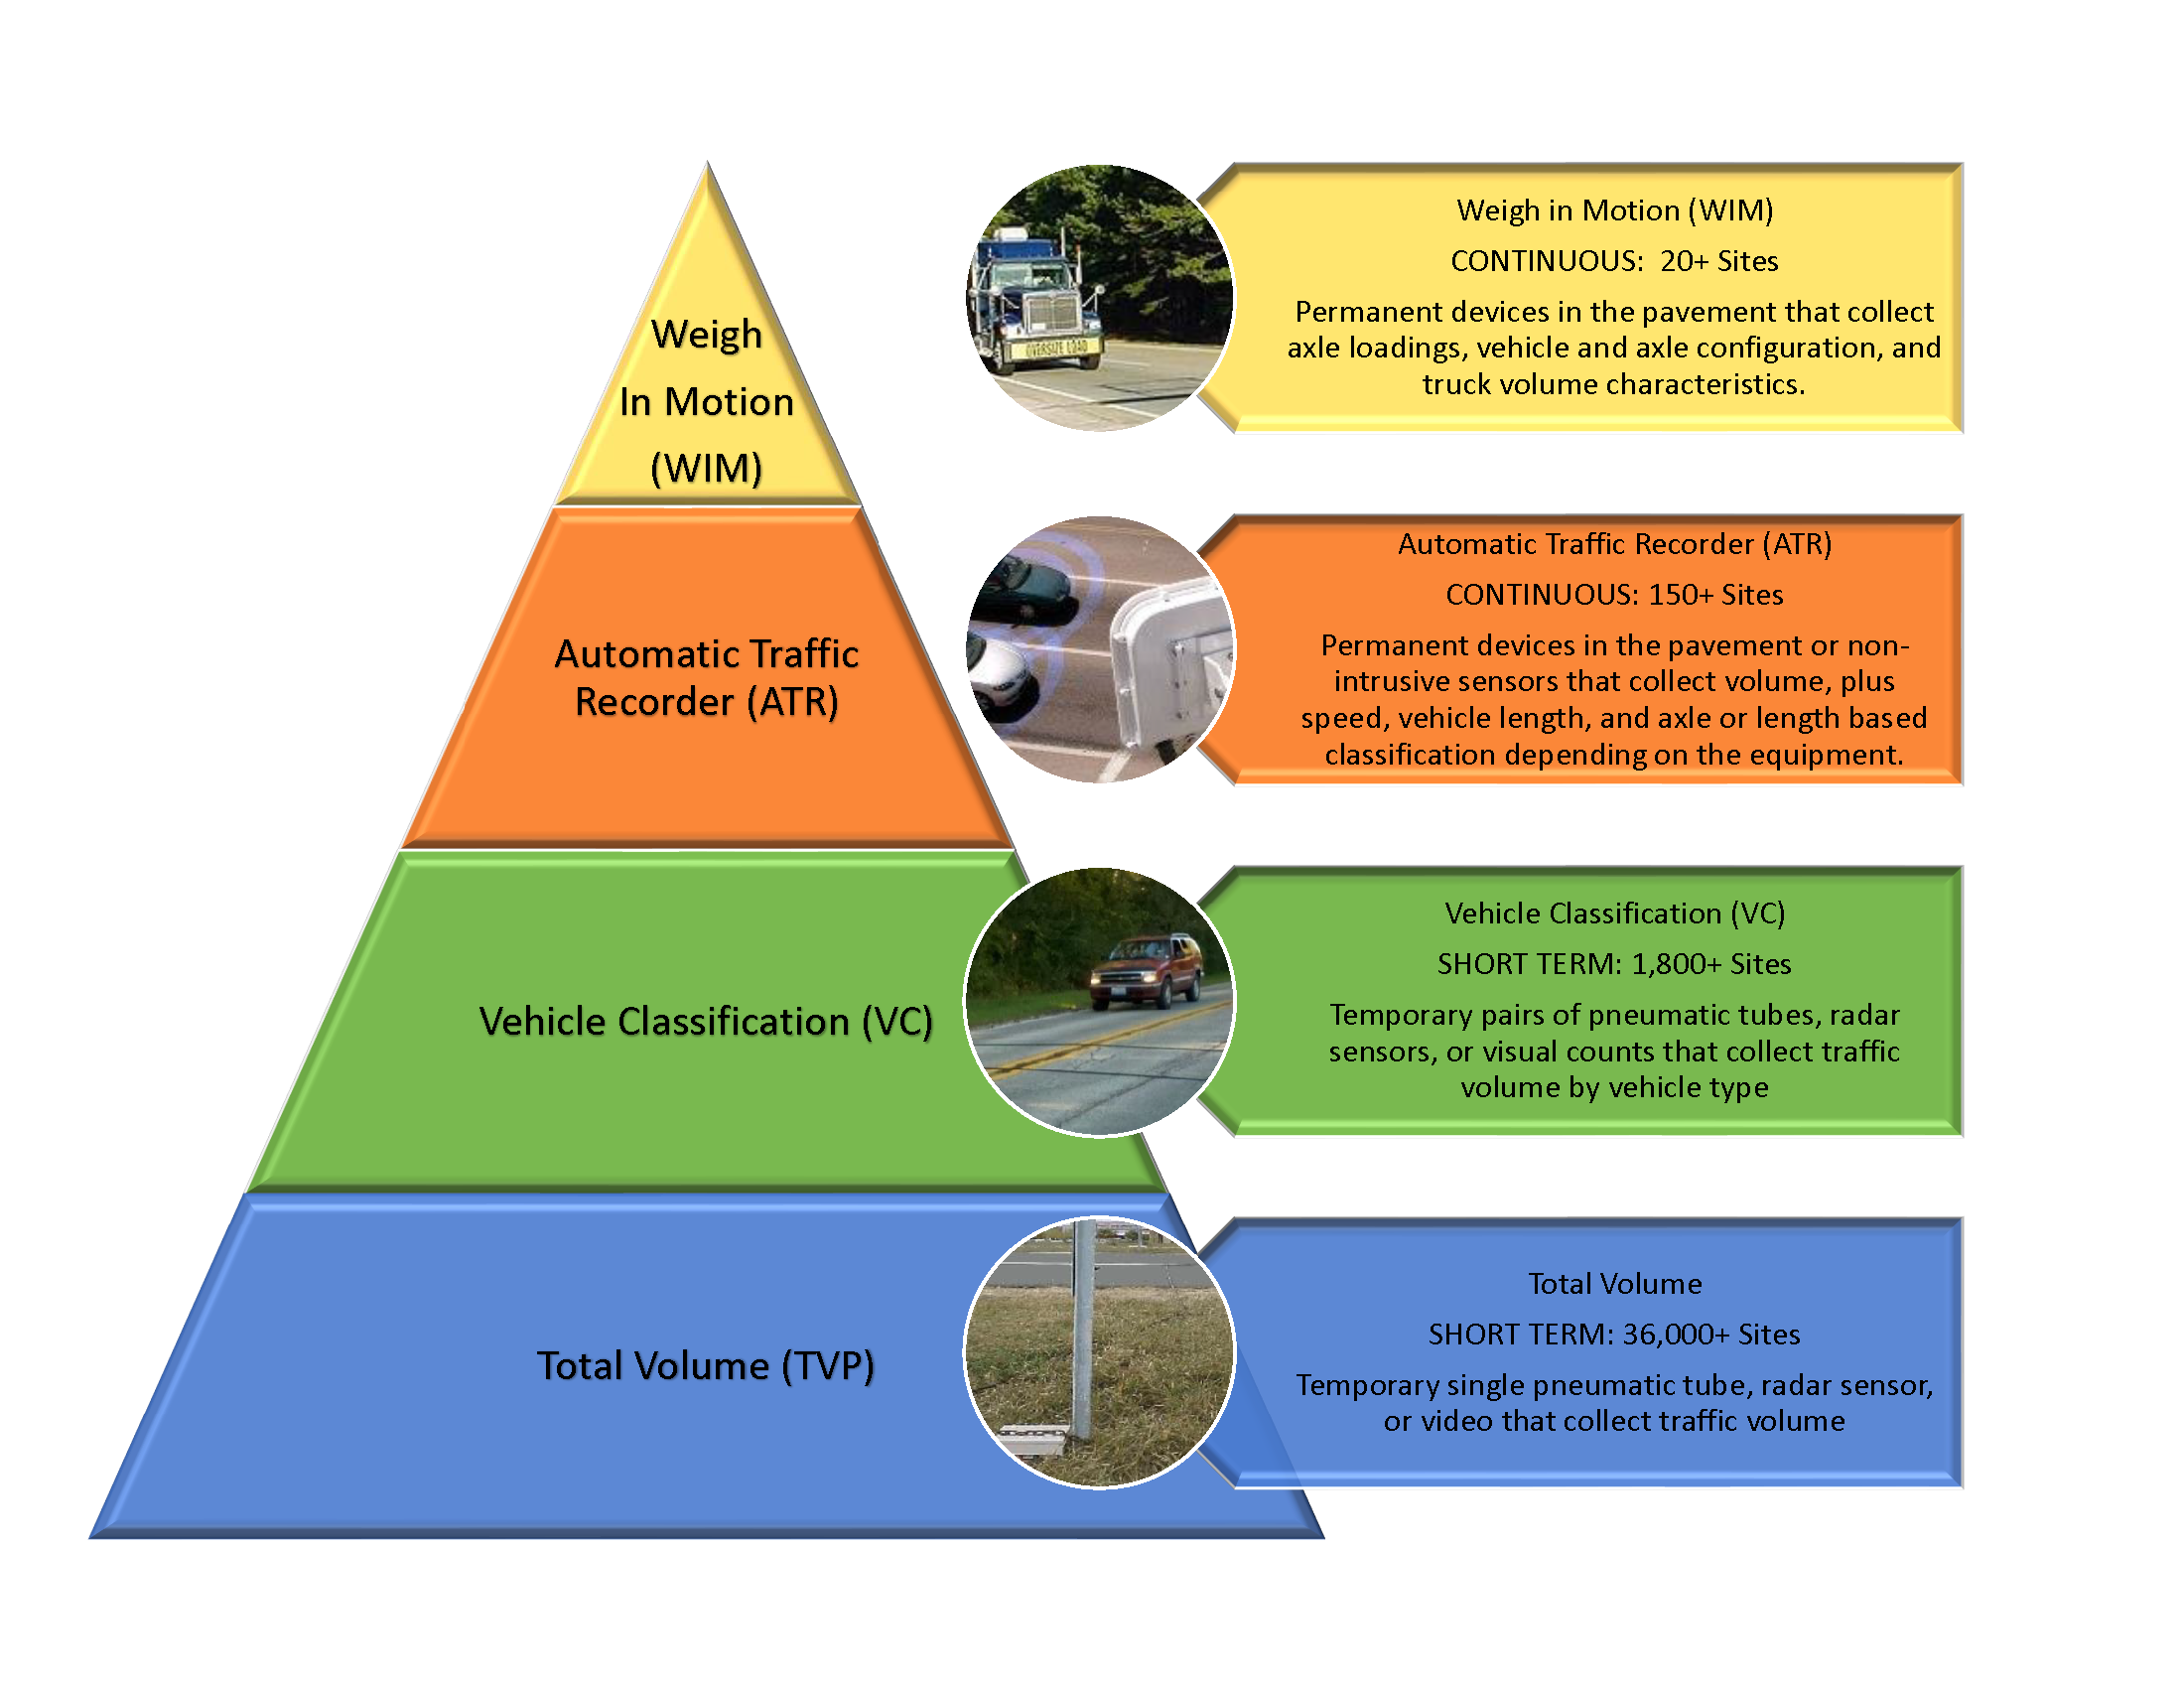 
This graphic represents the hierarchy of traffic data collection methods in the Traffic Forecasting & Analysis section. At the bottom of the pyramid, Weigh-In-Motion (WIM) sites collect four types of data at the fewest number of sites. At the top of the pyramid, thousands of sites statewide are used to collect one type of data, traffic volume.